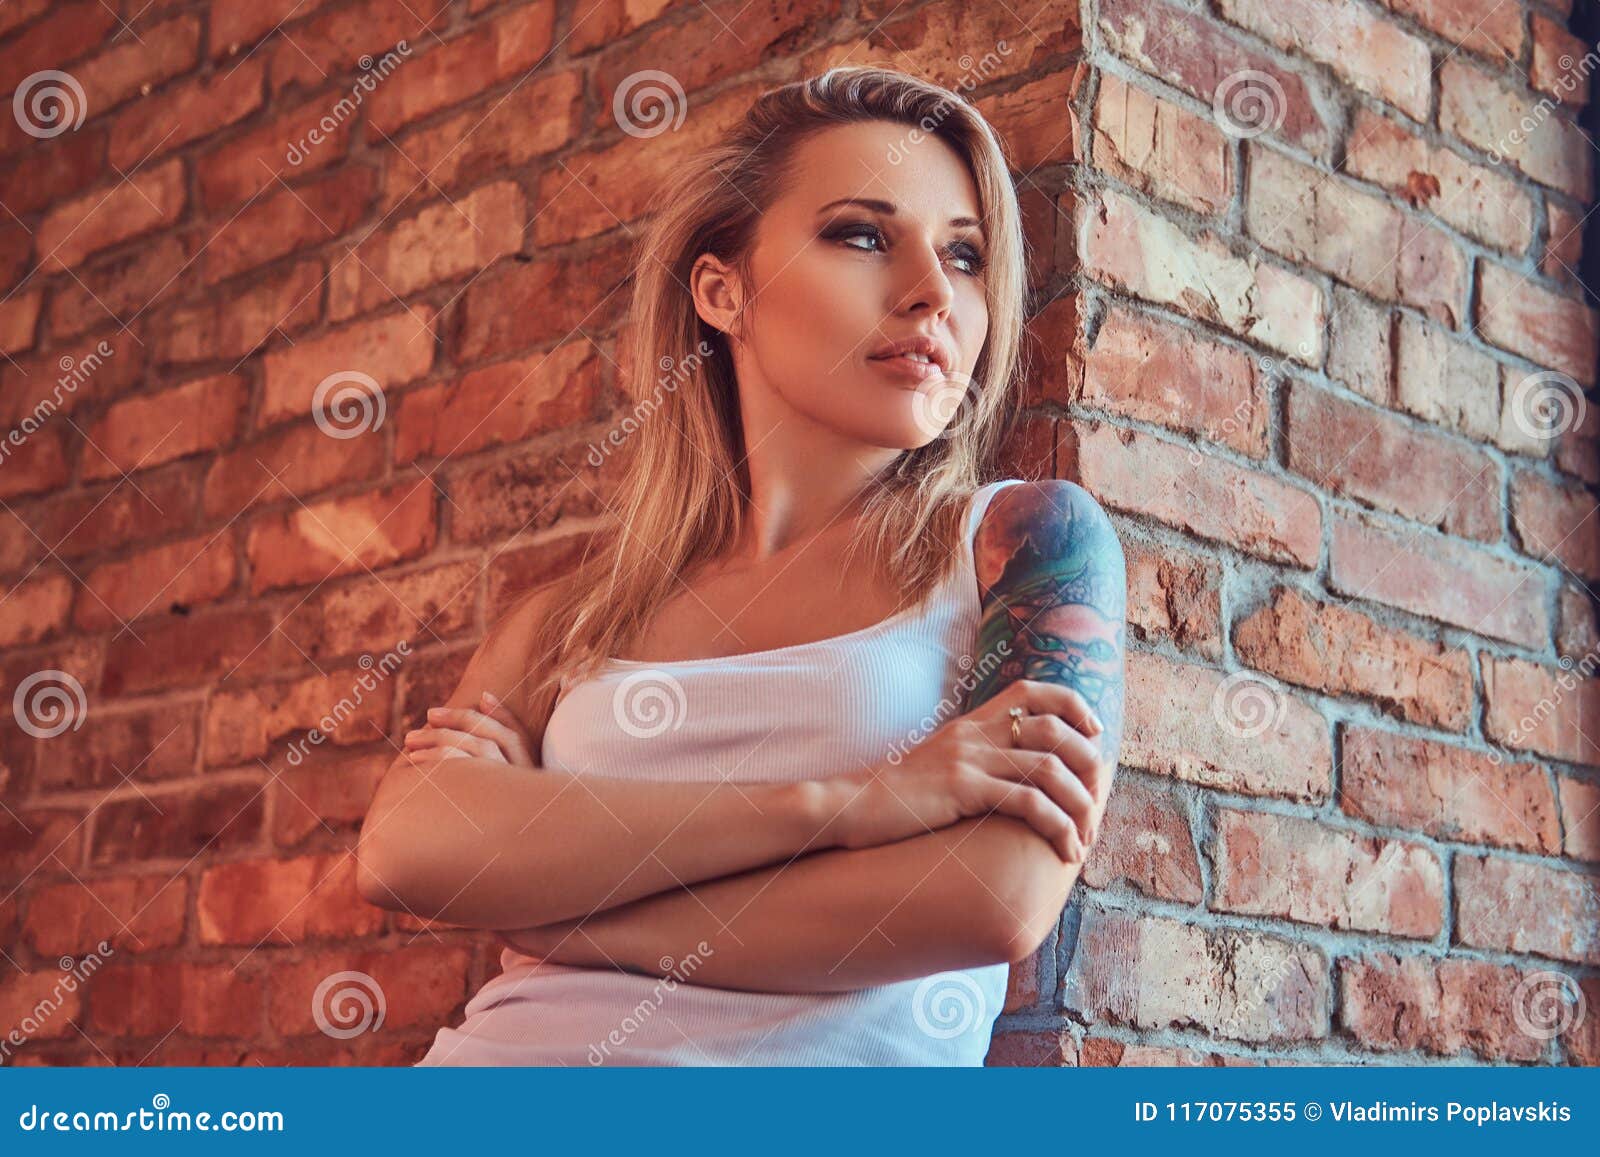 Portrait Of A Blonde Hipster Woman Standing With Crossed Arms While